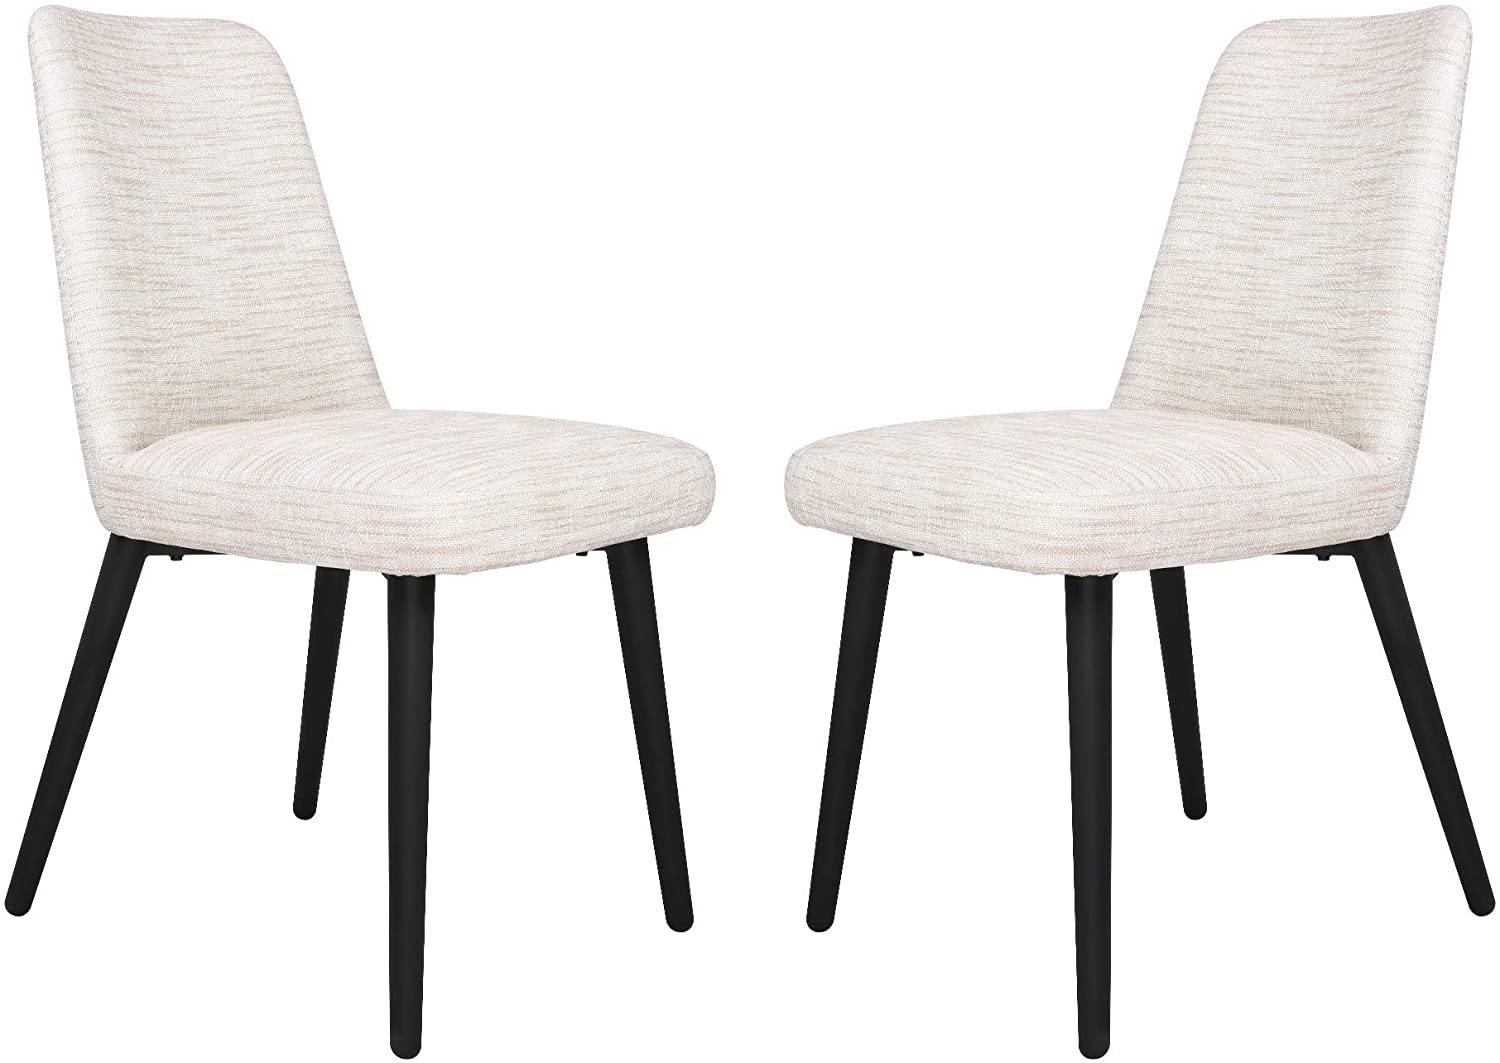 Modern Dining Chairs Set of 2 with Soft Foam Cushion, Comfortable and Easy to Clean Leather Side Chair, Durable Restaurant Chair - Bosonshop